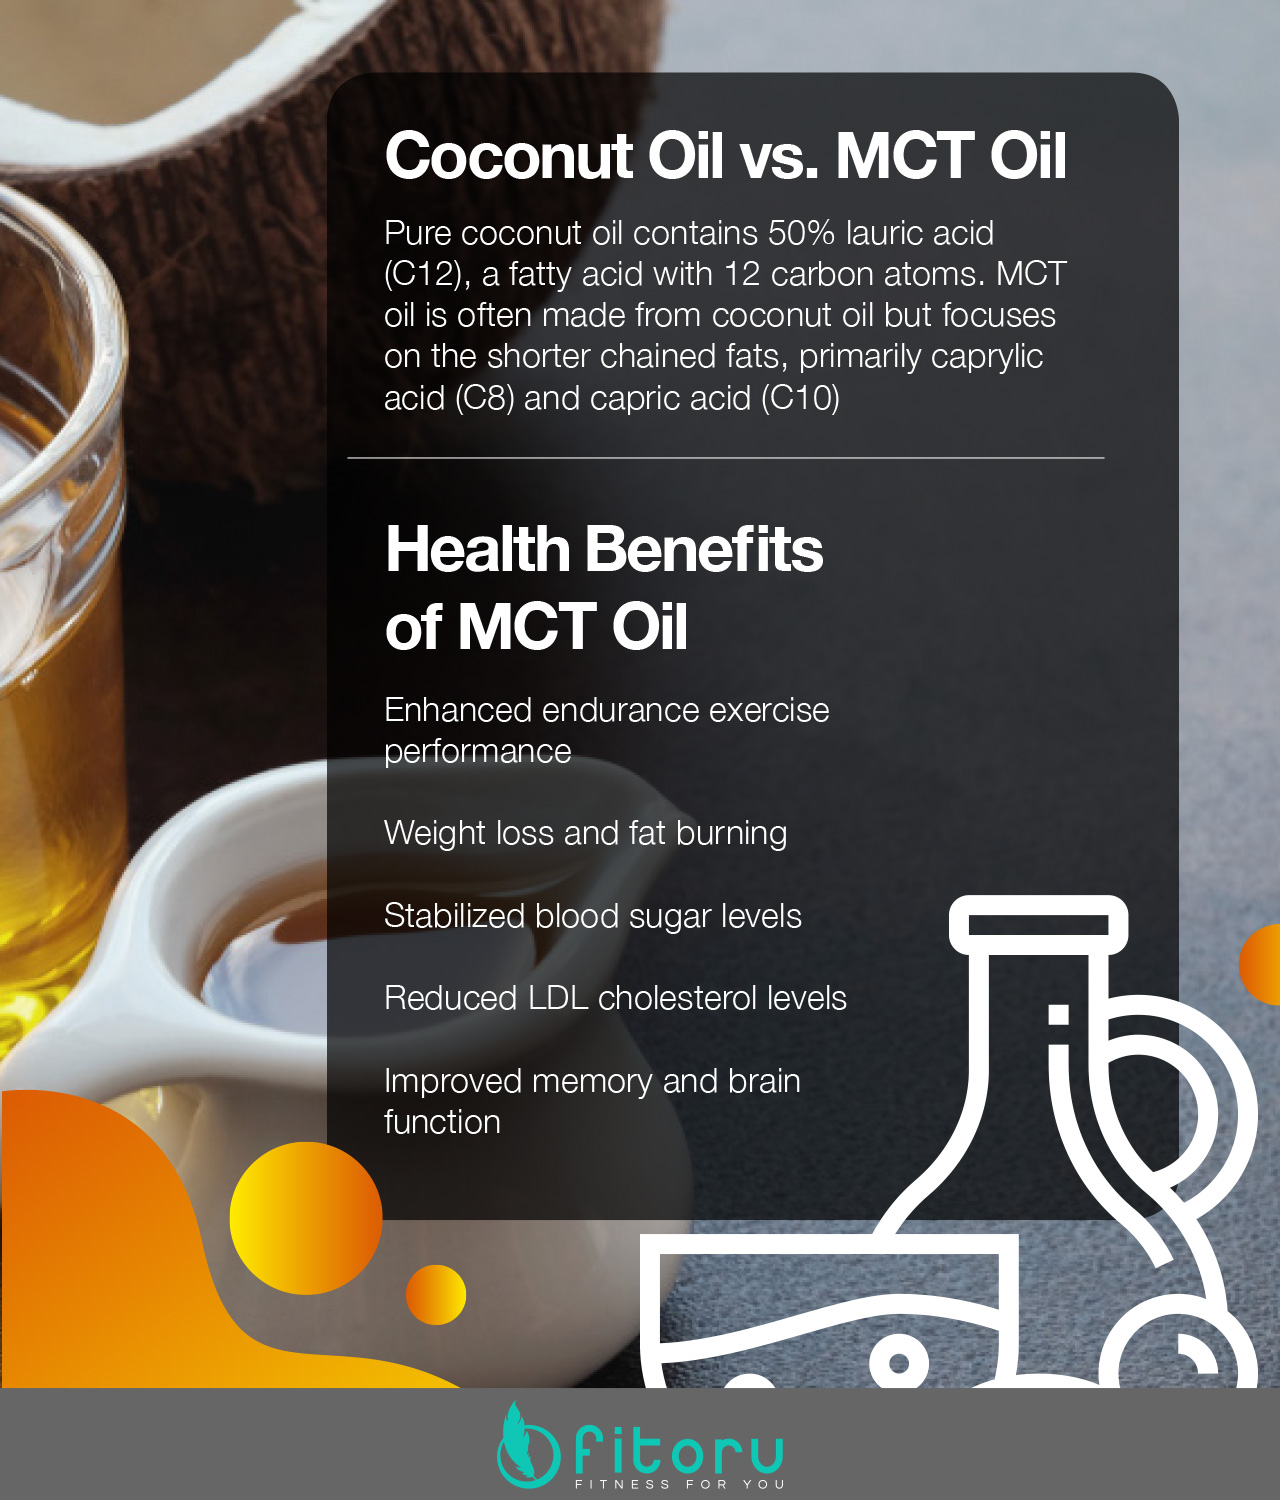 Are you taking MCT oil for weight loss?